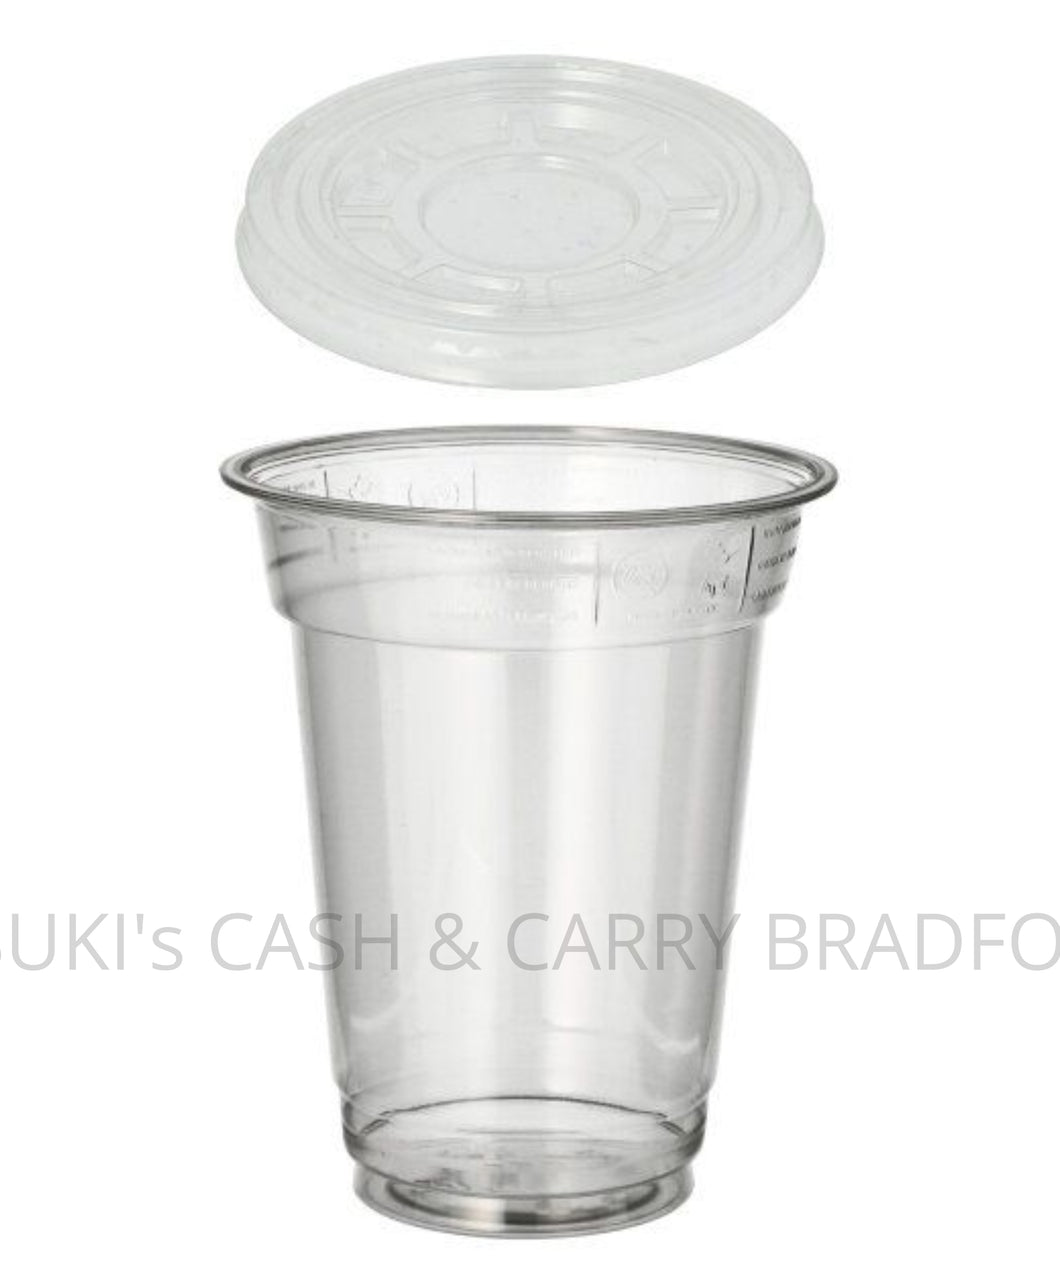 300ml Plastic Reusable Cups with Flat (No Hole) Lids (Pack of 50pcs)